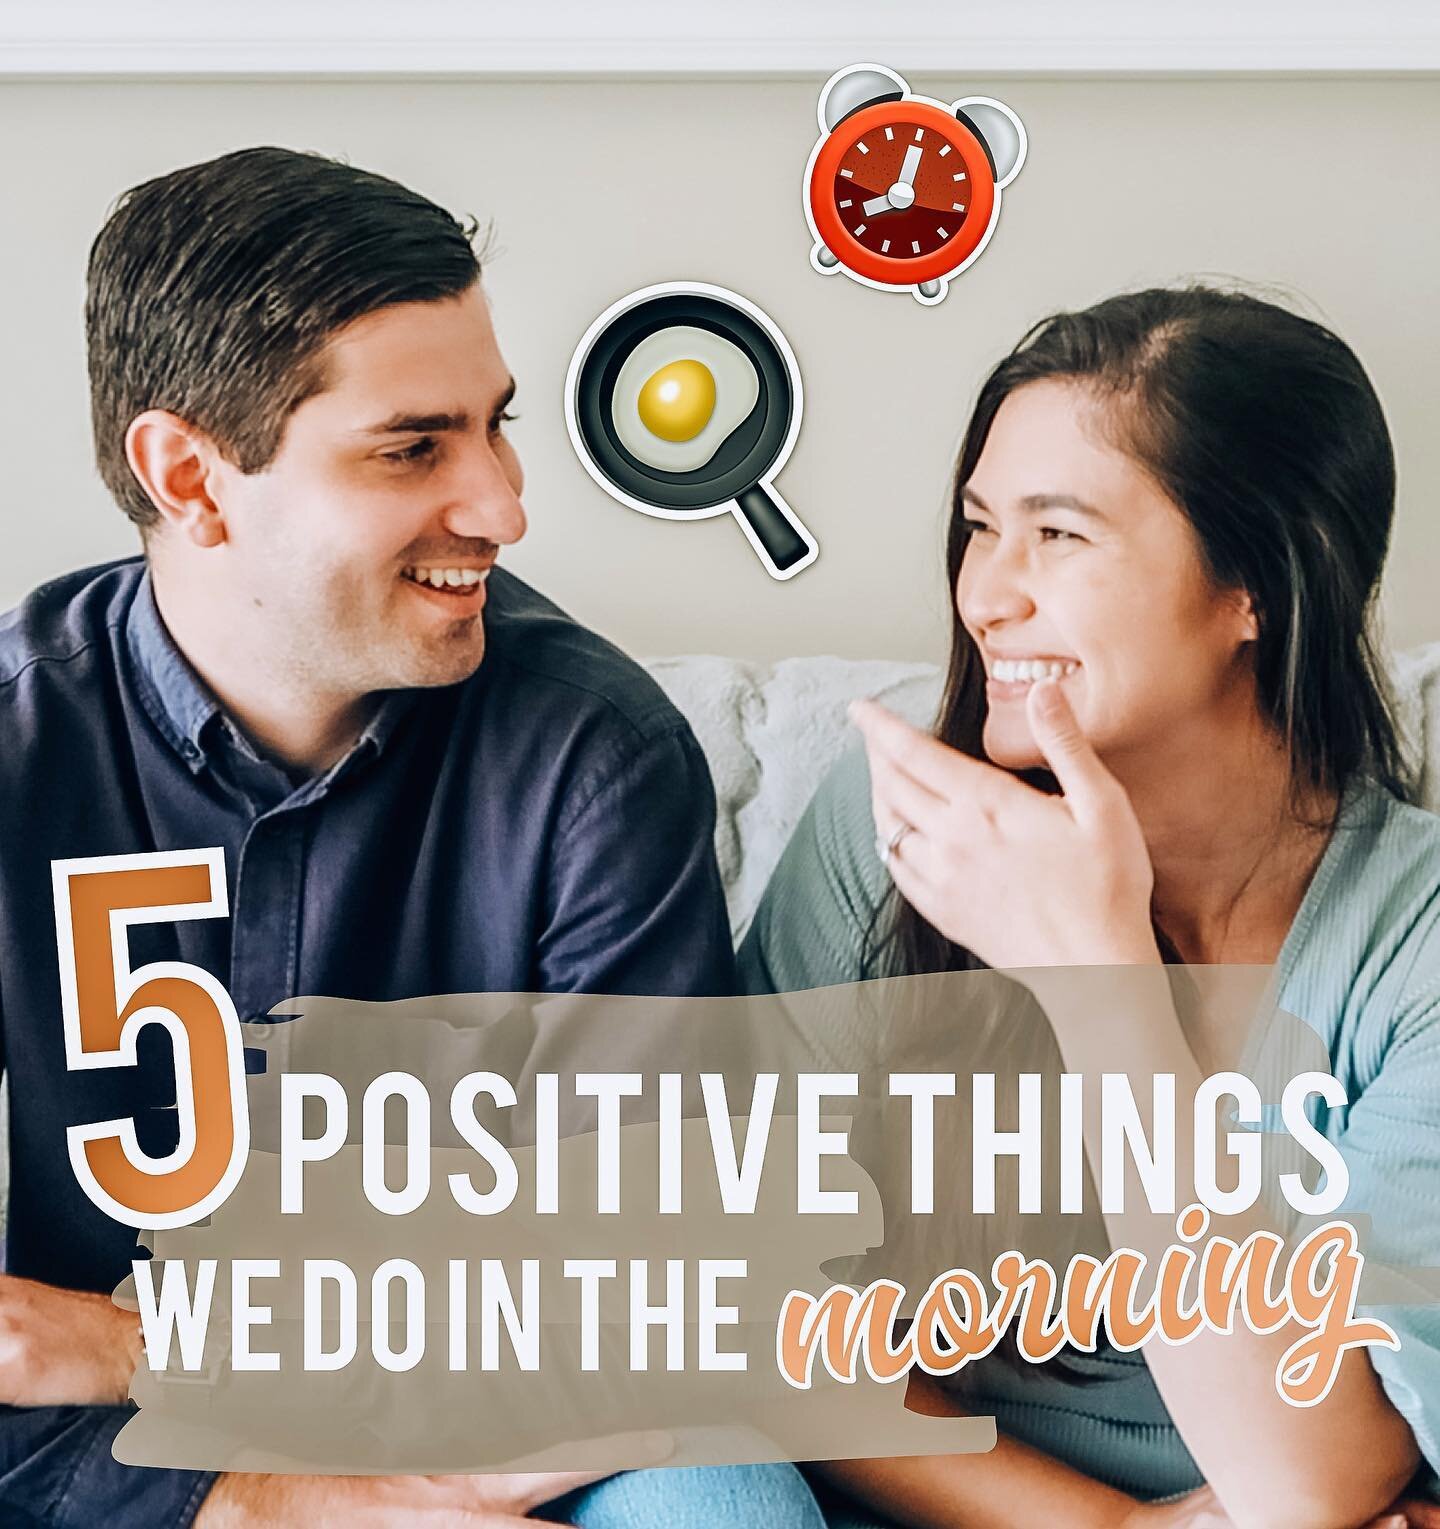 New YouTube video is now LIVE! ⚡️ Sharing the FIVE positive things we do in the morning! Each thing makes us feel happier, more productive and ready to tackle the... toddler 🤔 day! Hope they help! Also bloopers is a MUST WATCH we legit had to retake